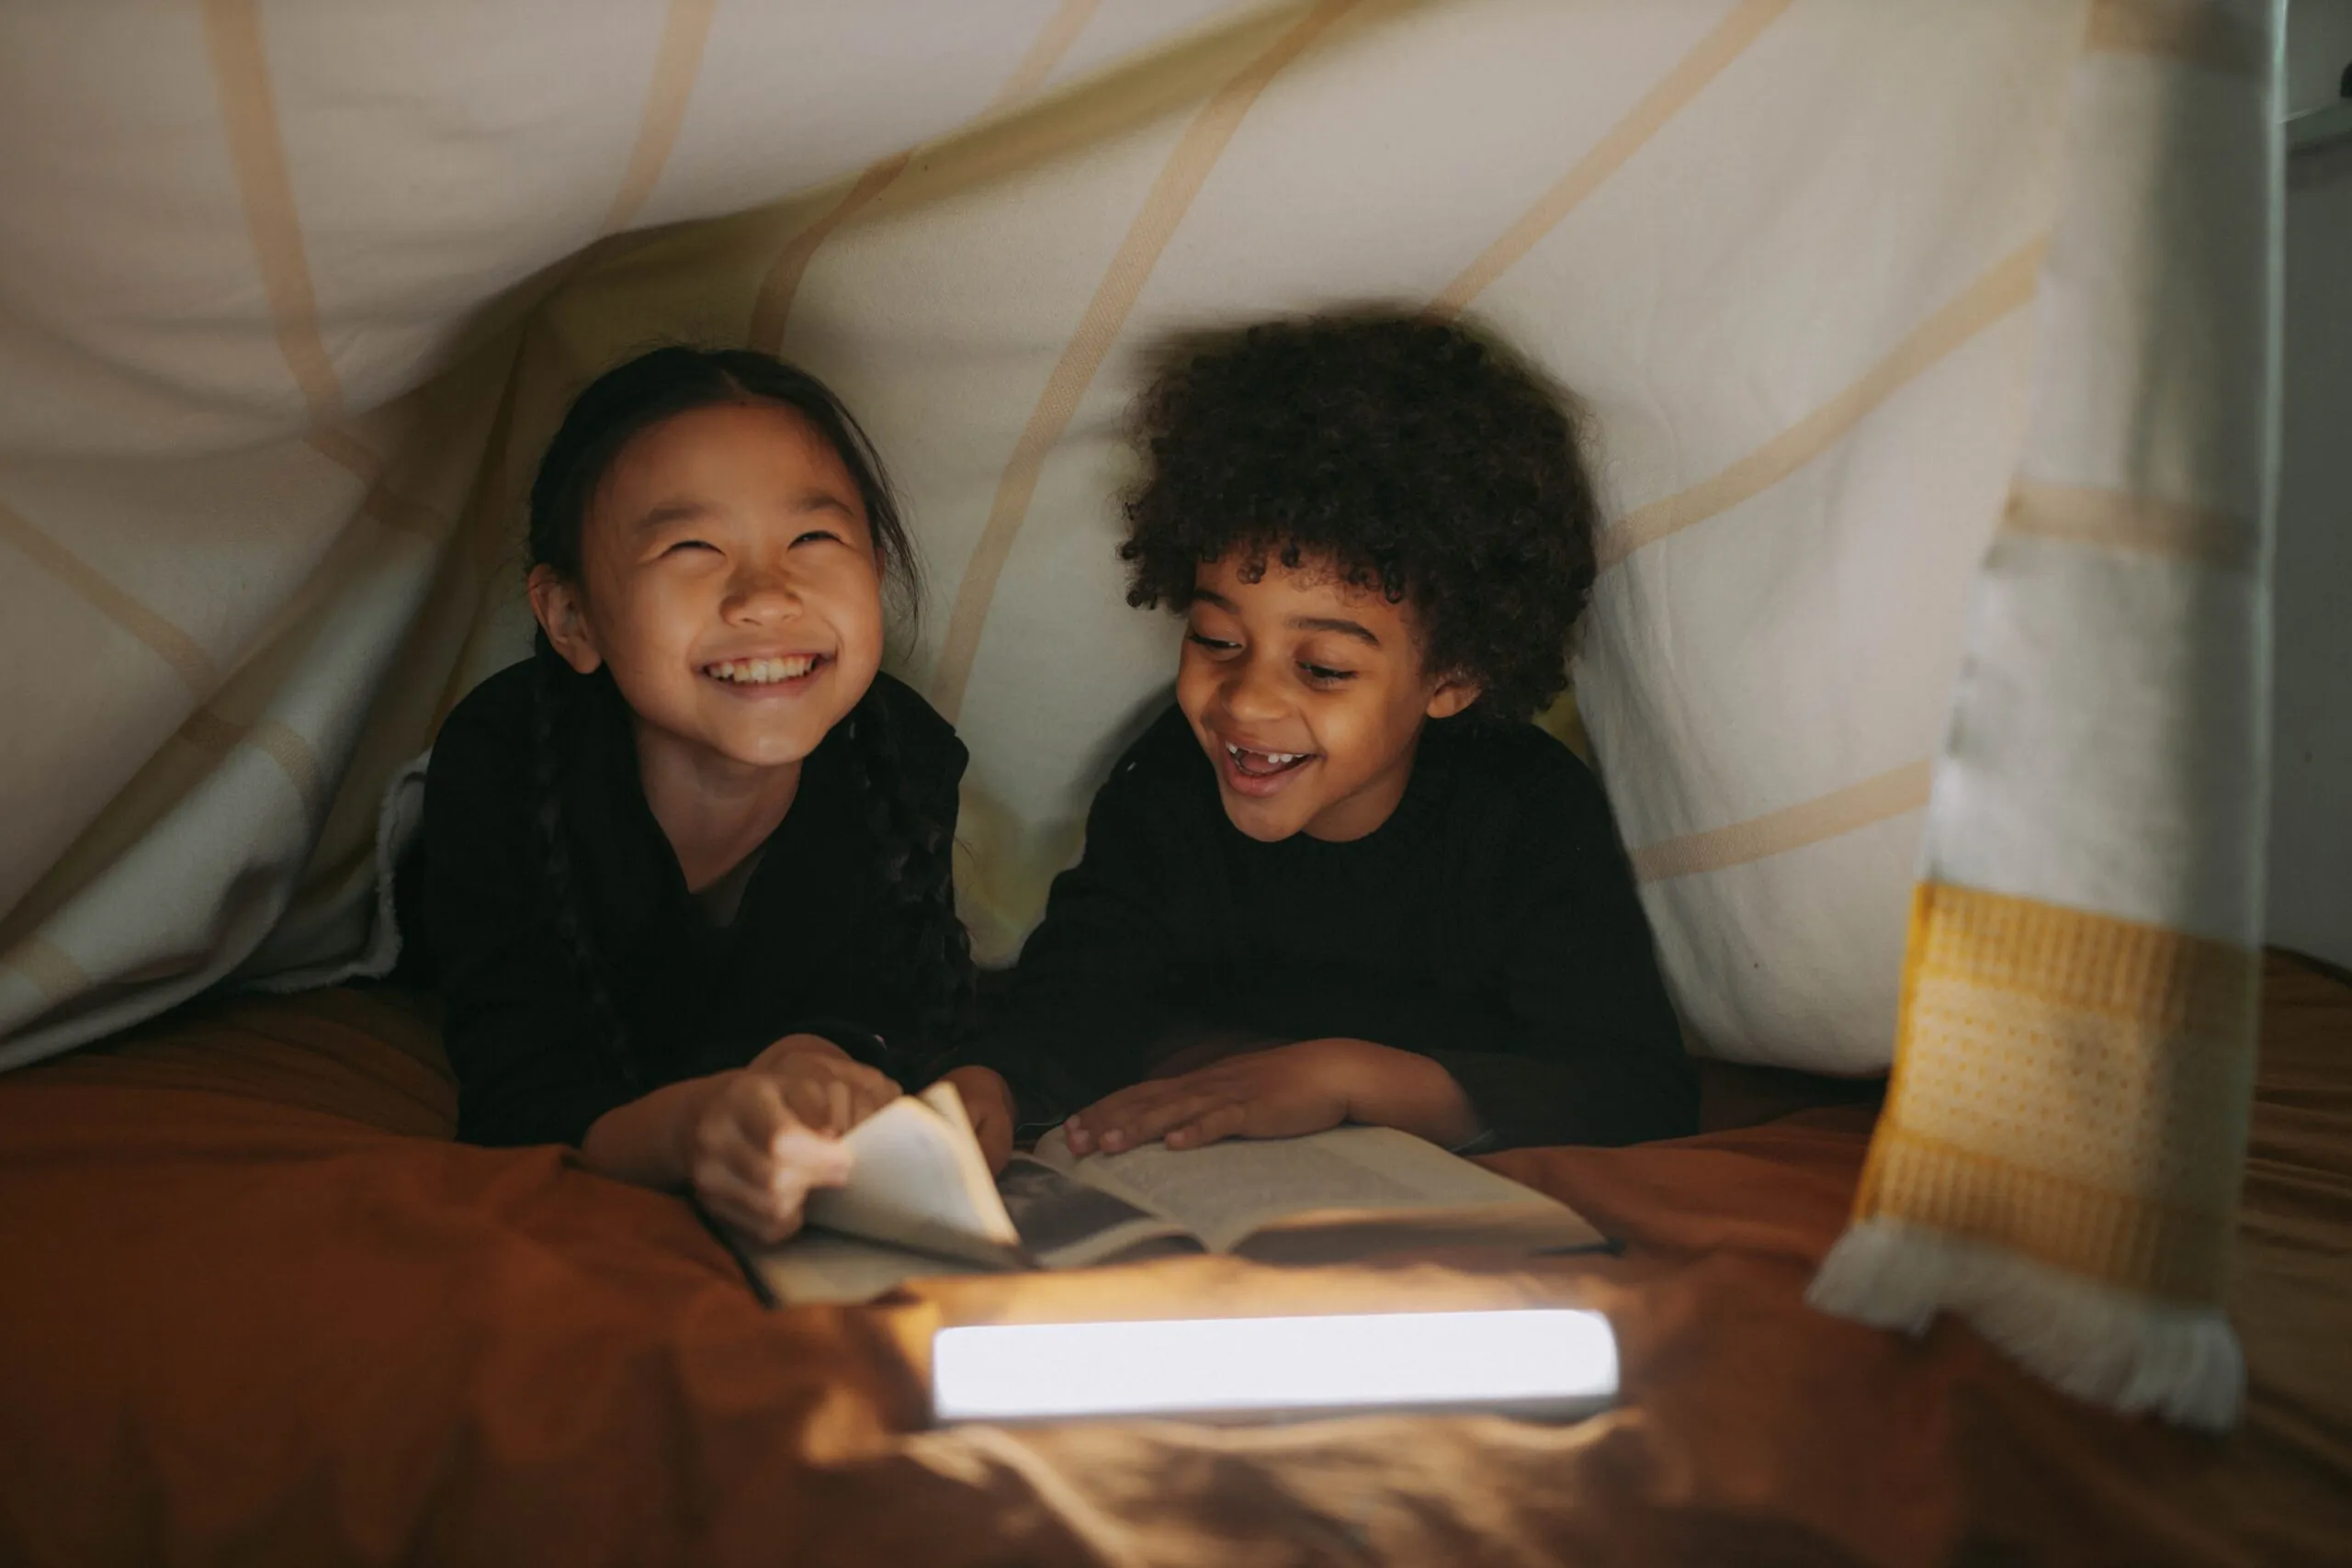 Kids Smiling In Tent